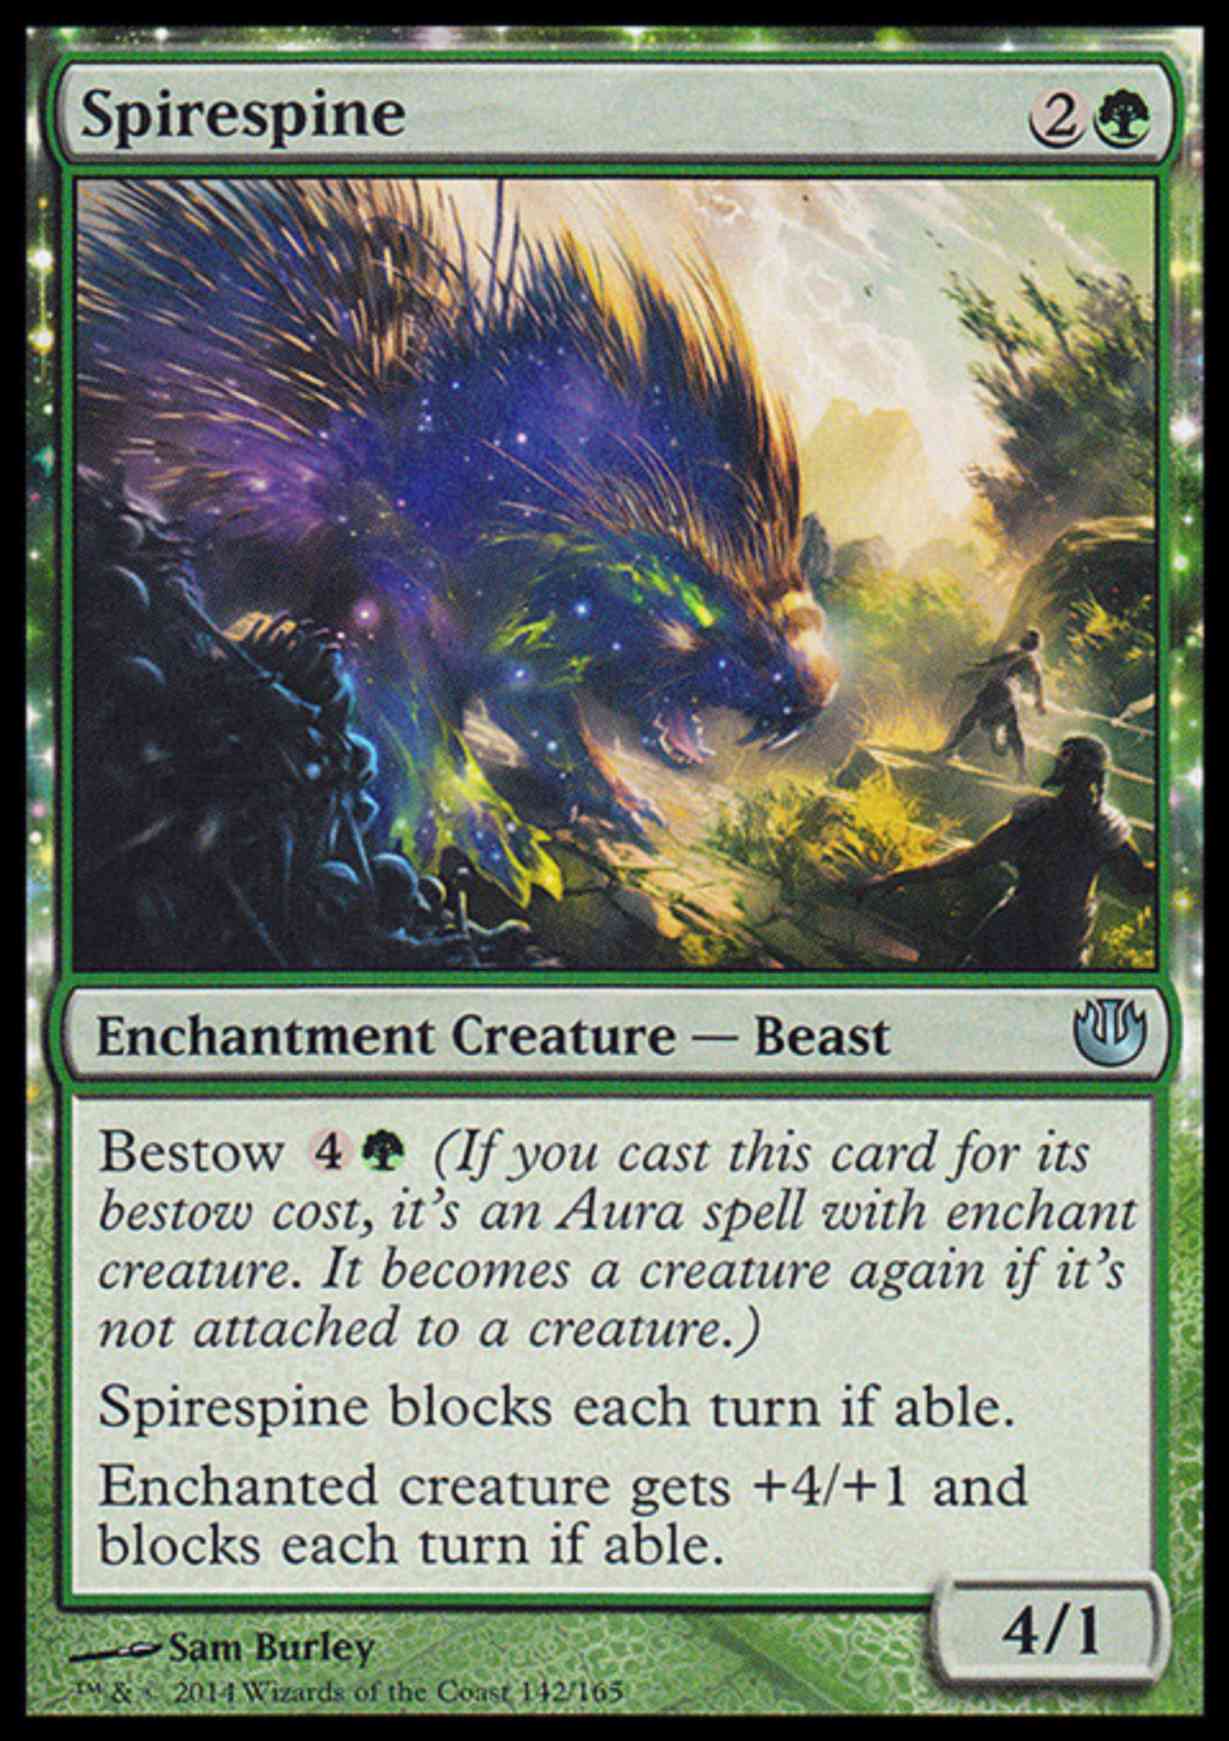 Spirespine magic card front